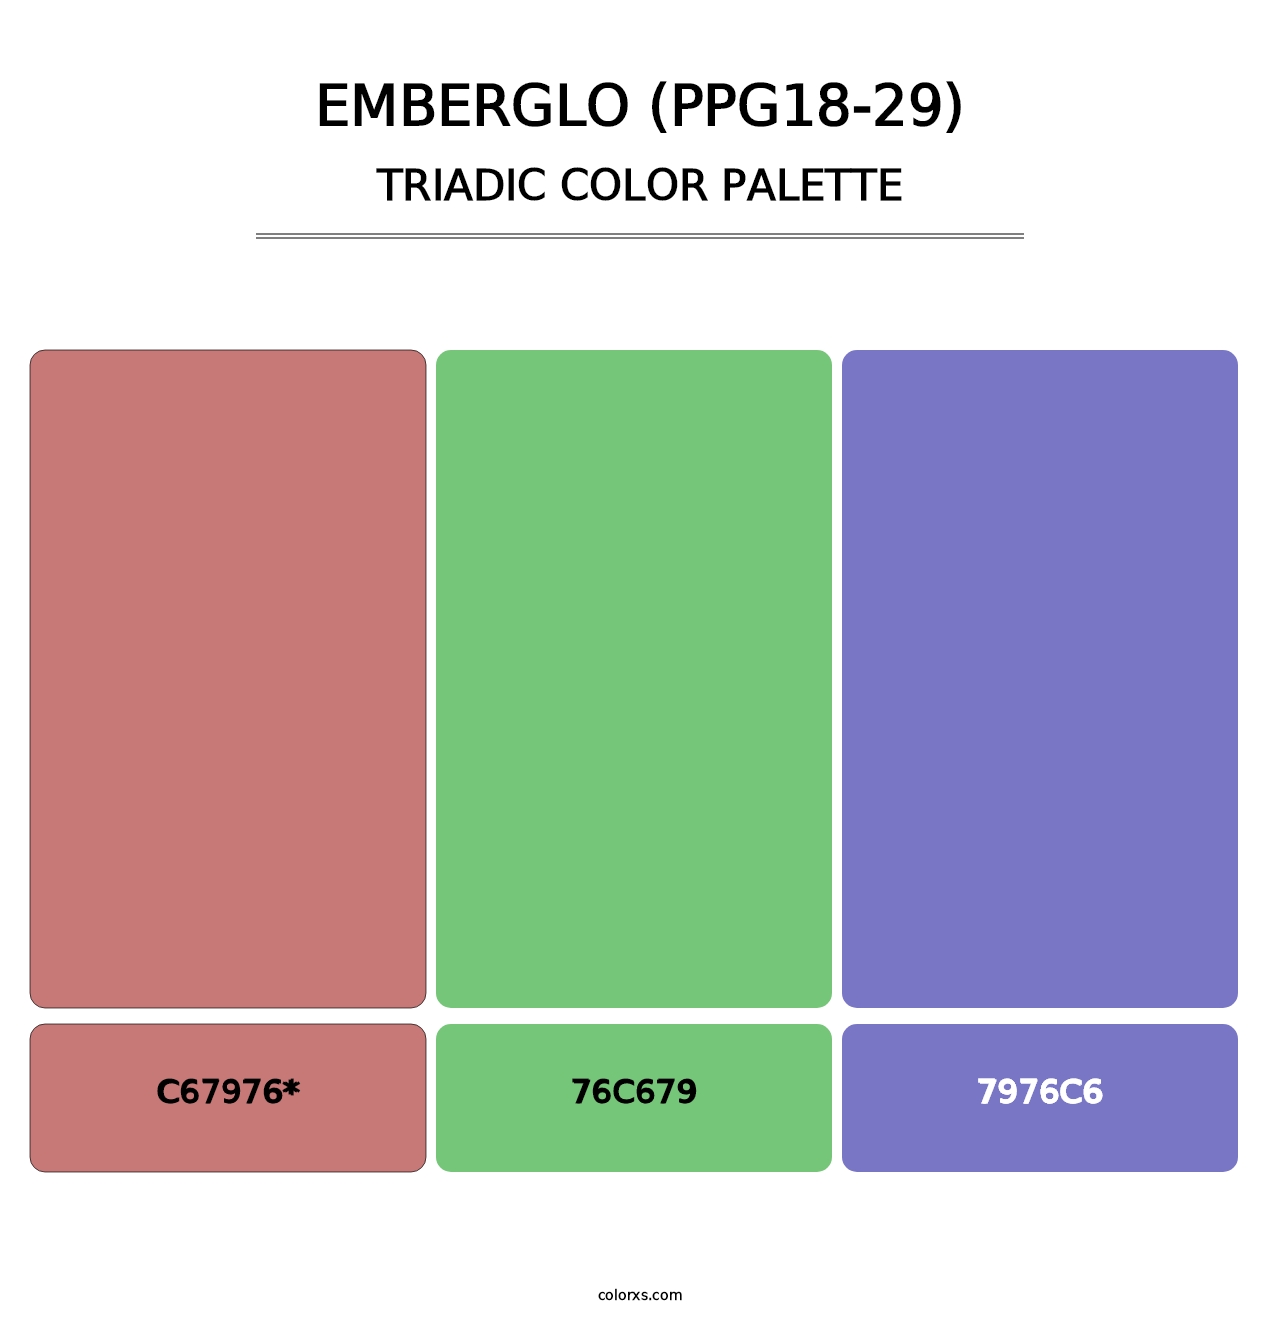 Emberglo (PPG18-29) - Triadic Color Palette